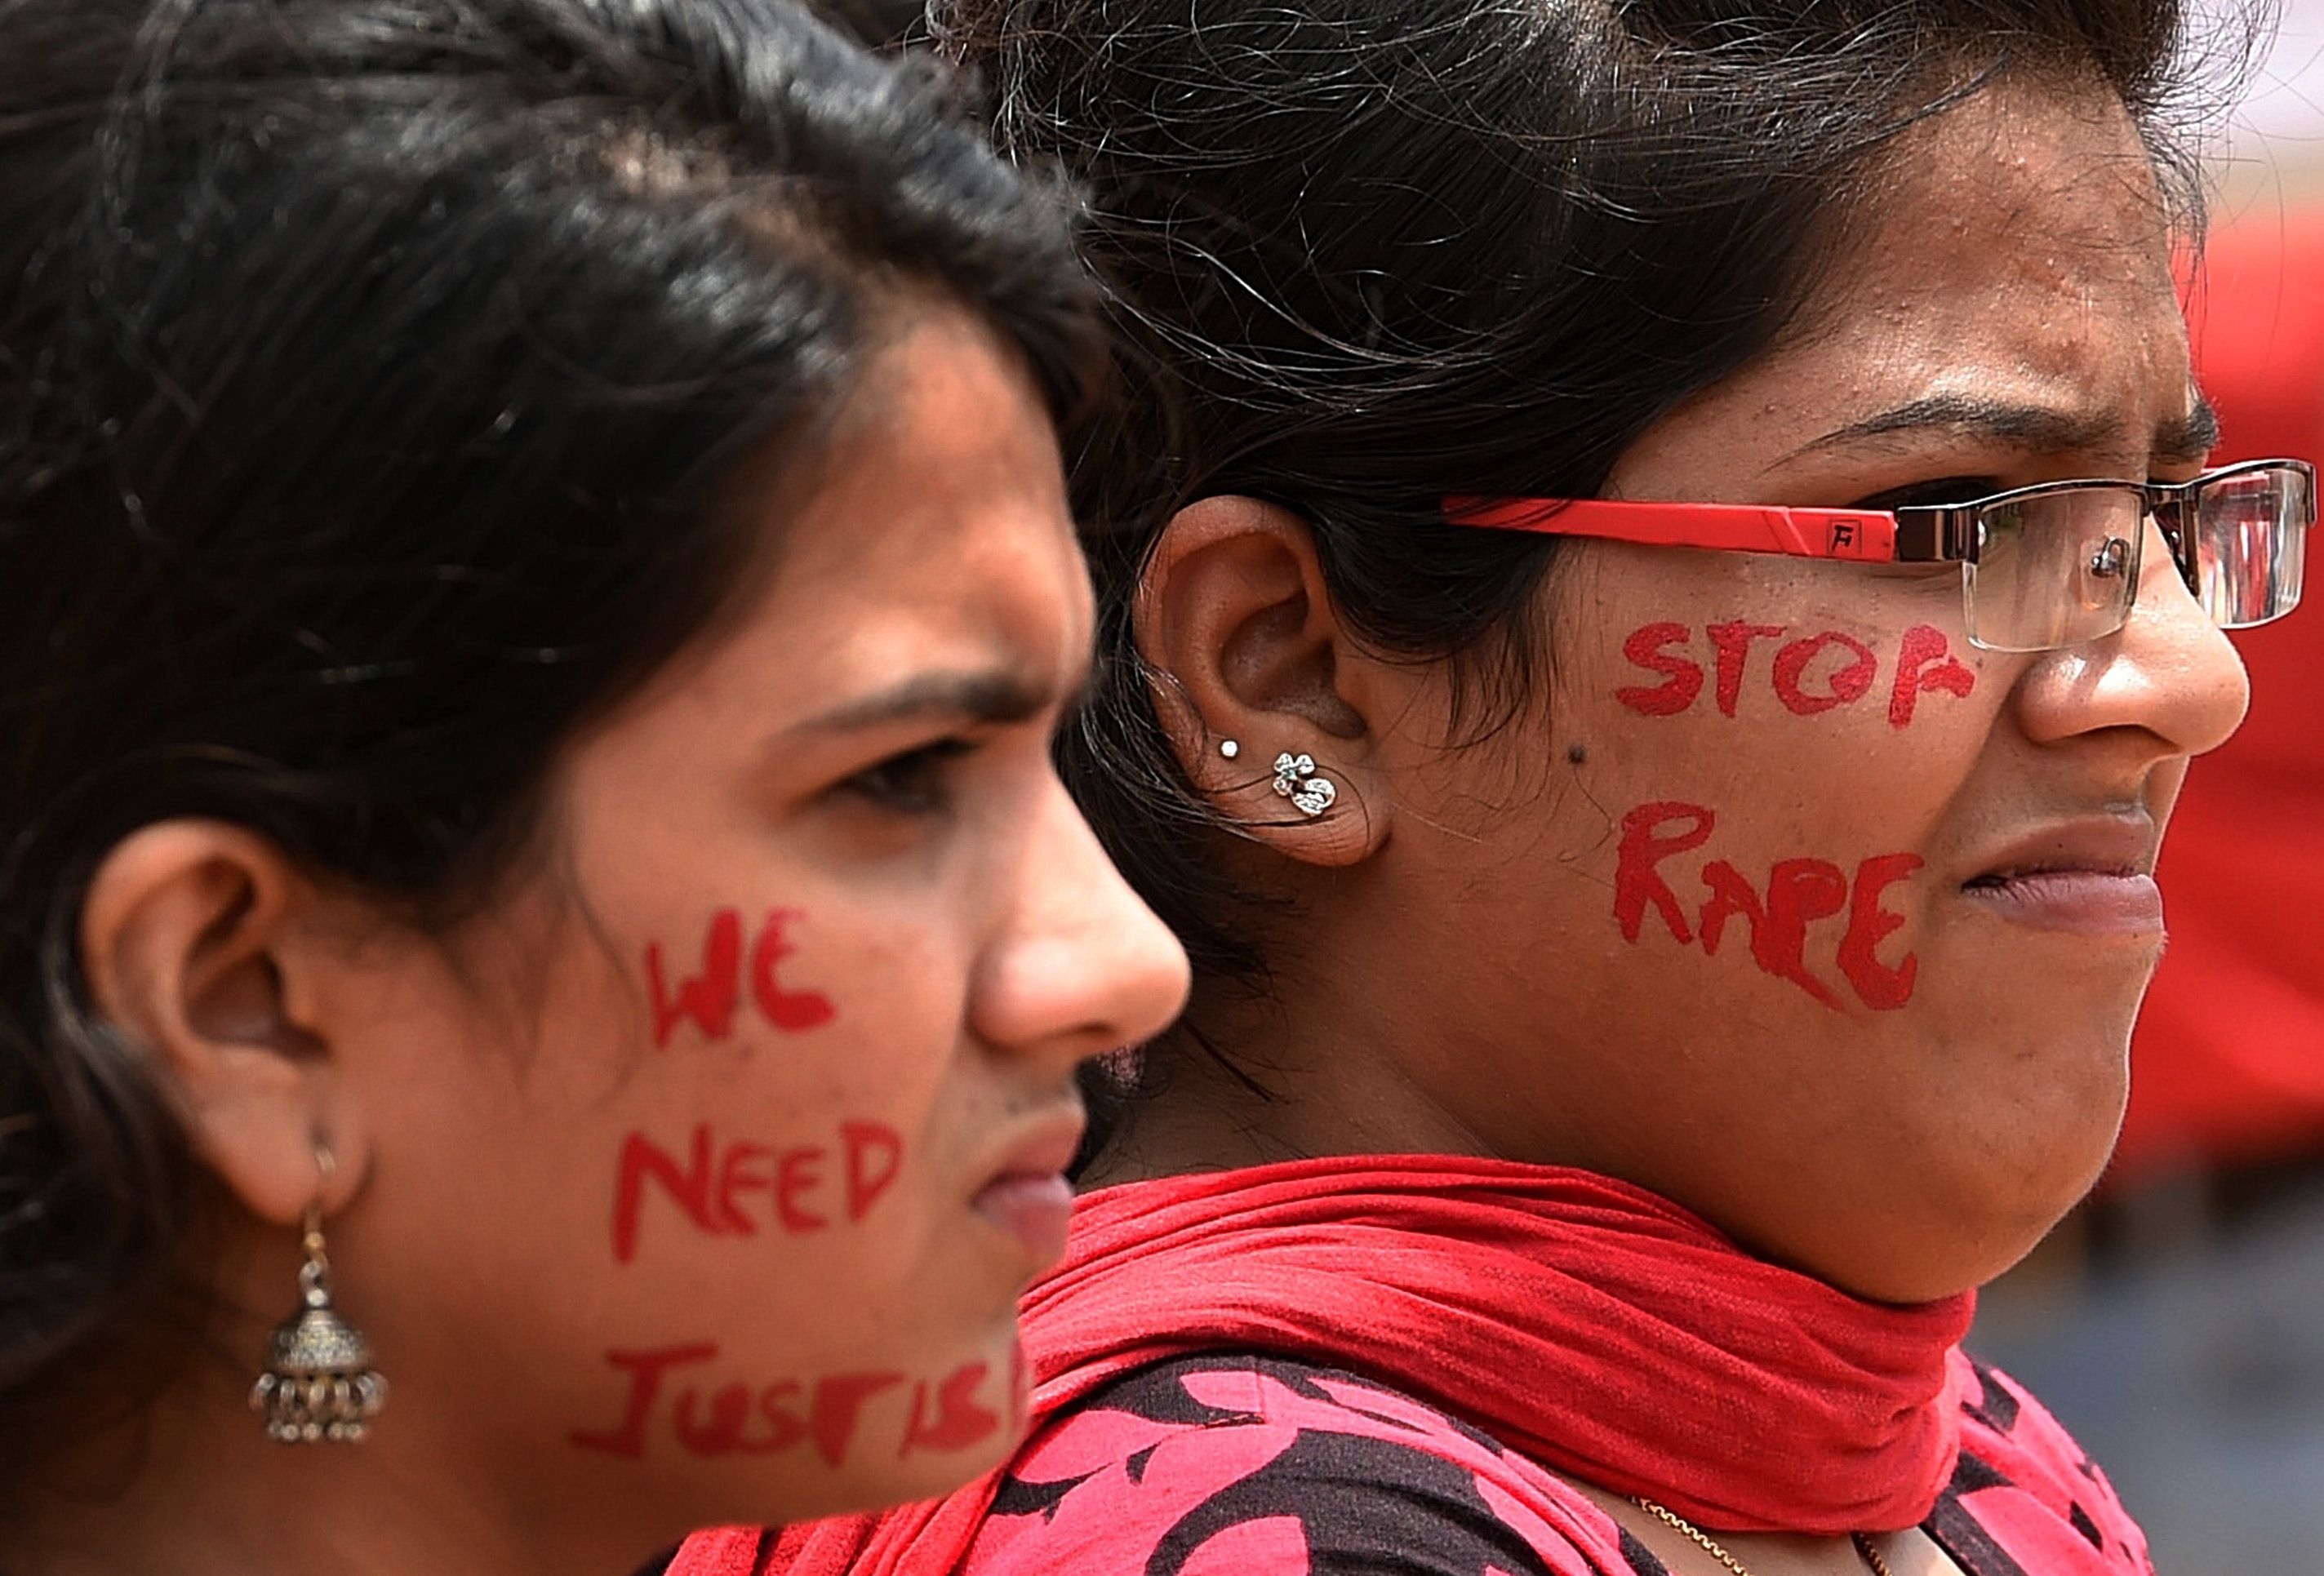 Indian activists are increasingly protesting against incidents of sexual abuse, molestation and rapes against women and children. Photo: AFP 